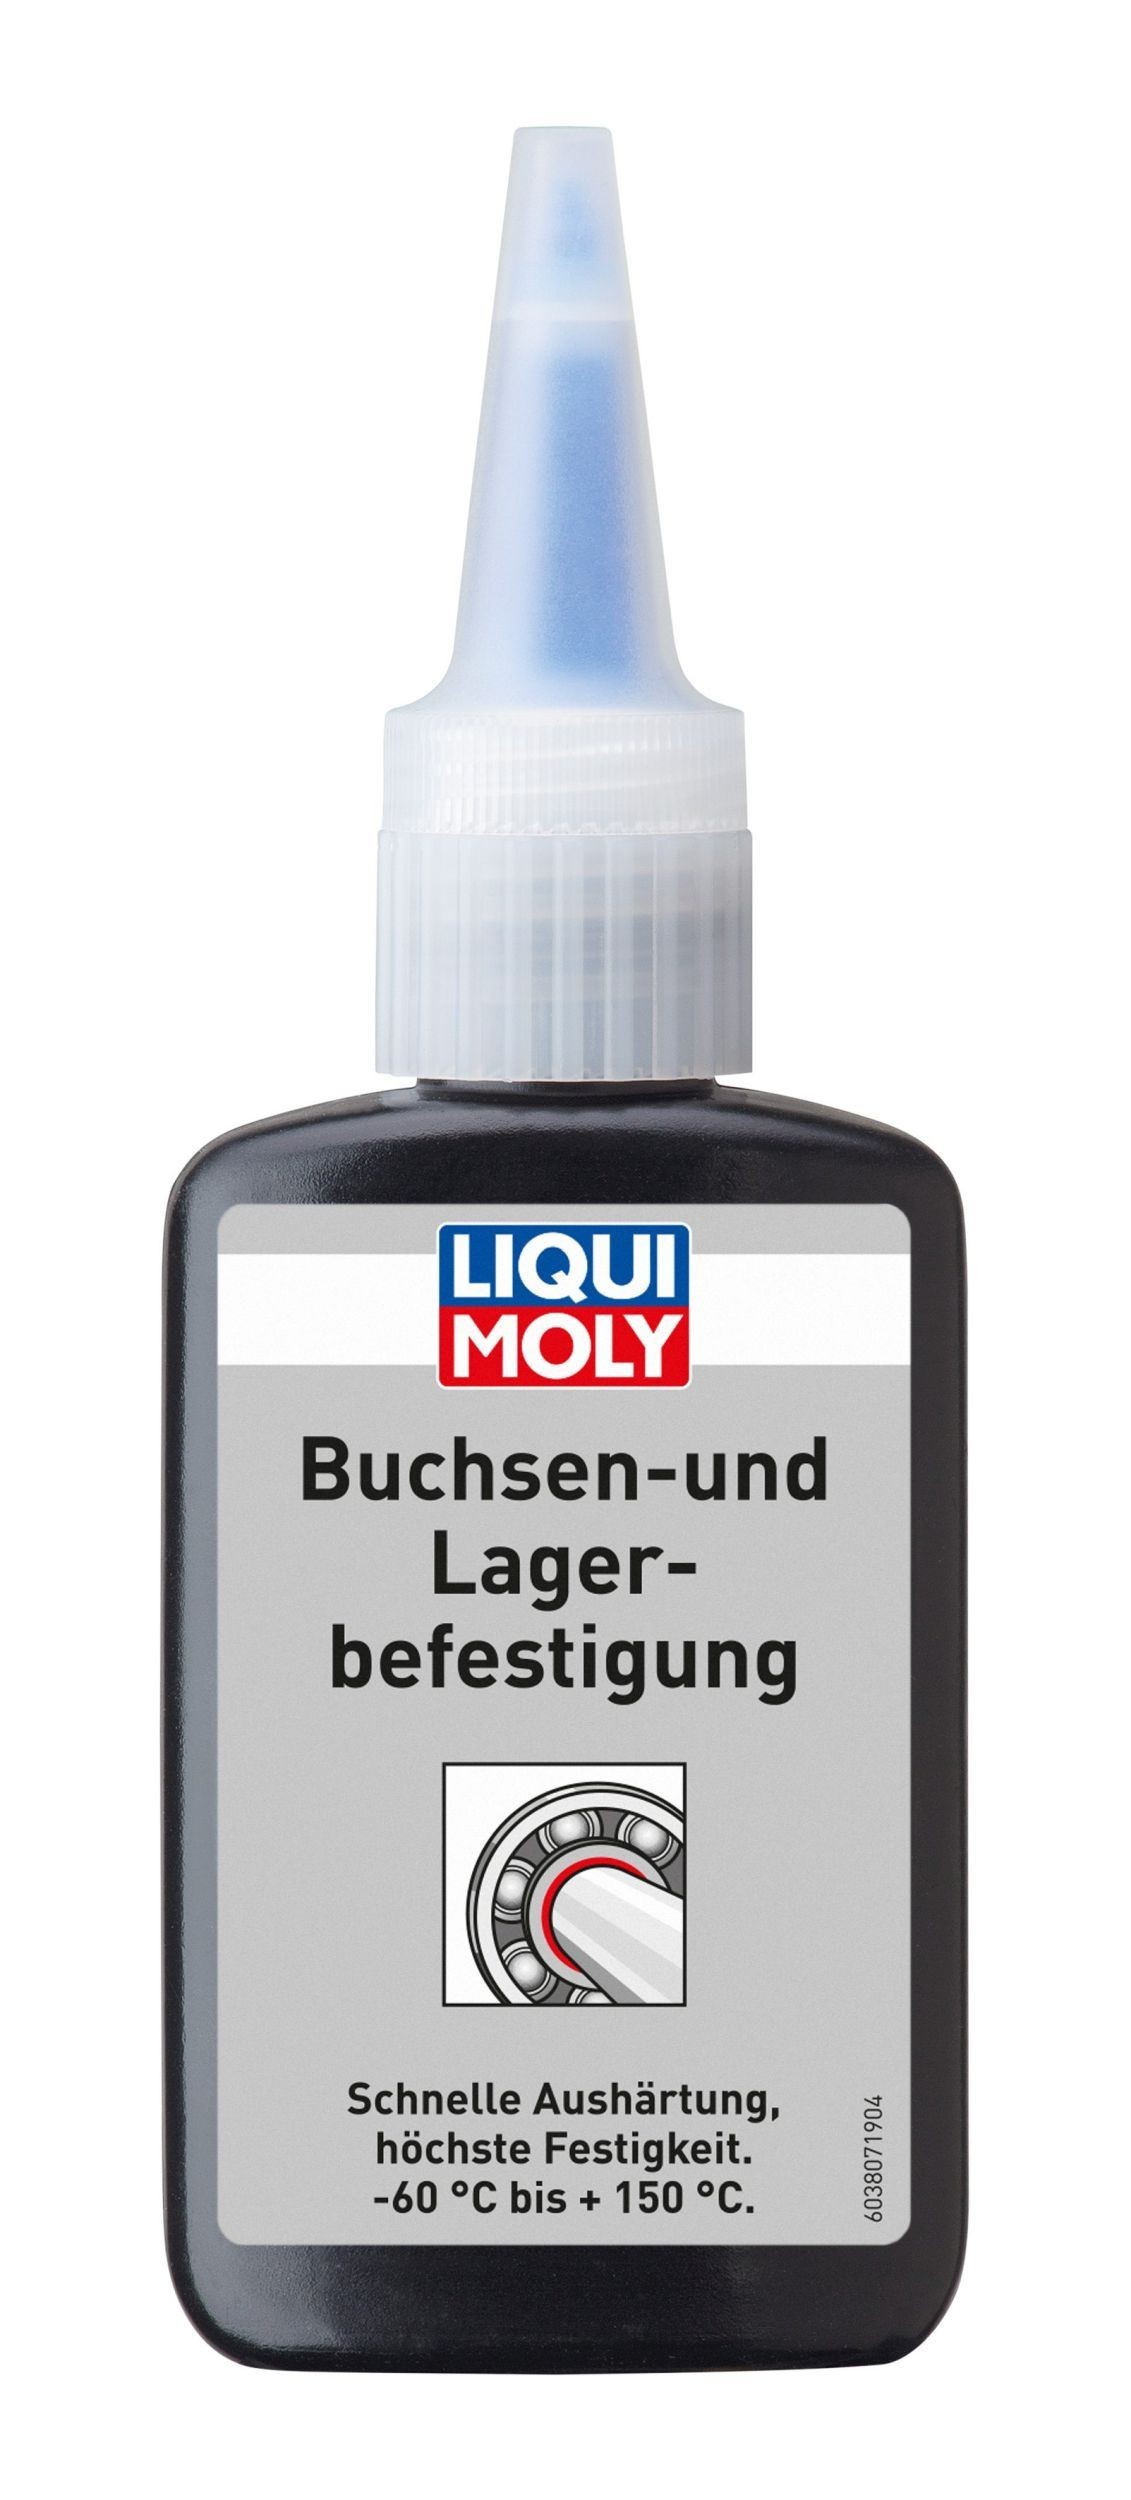 LIQUI MOLY 3807 Assembly paste Bottle, Weight: 50g